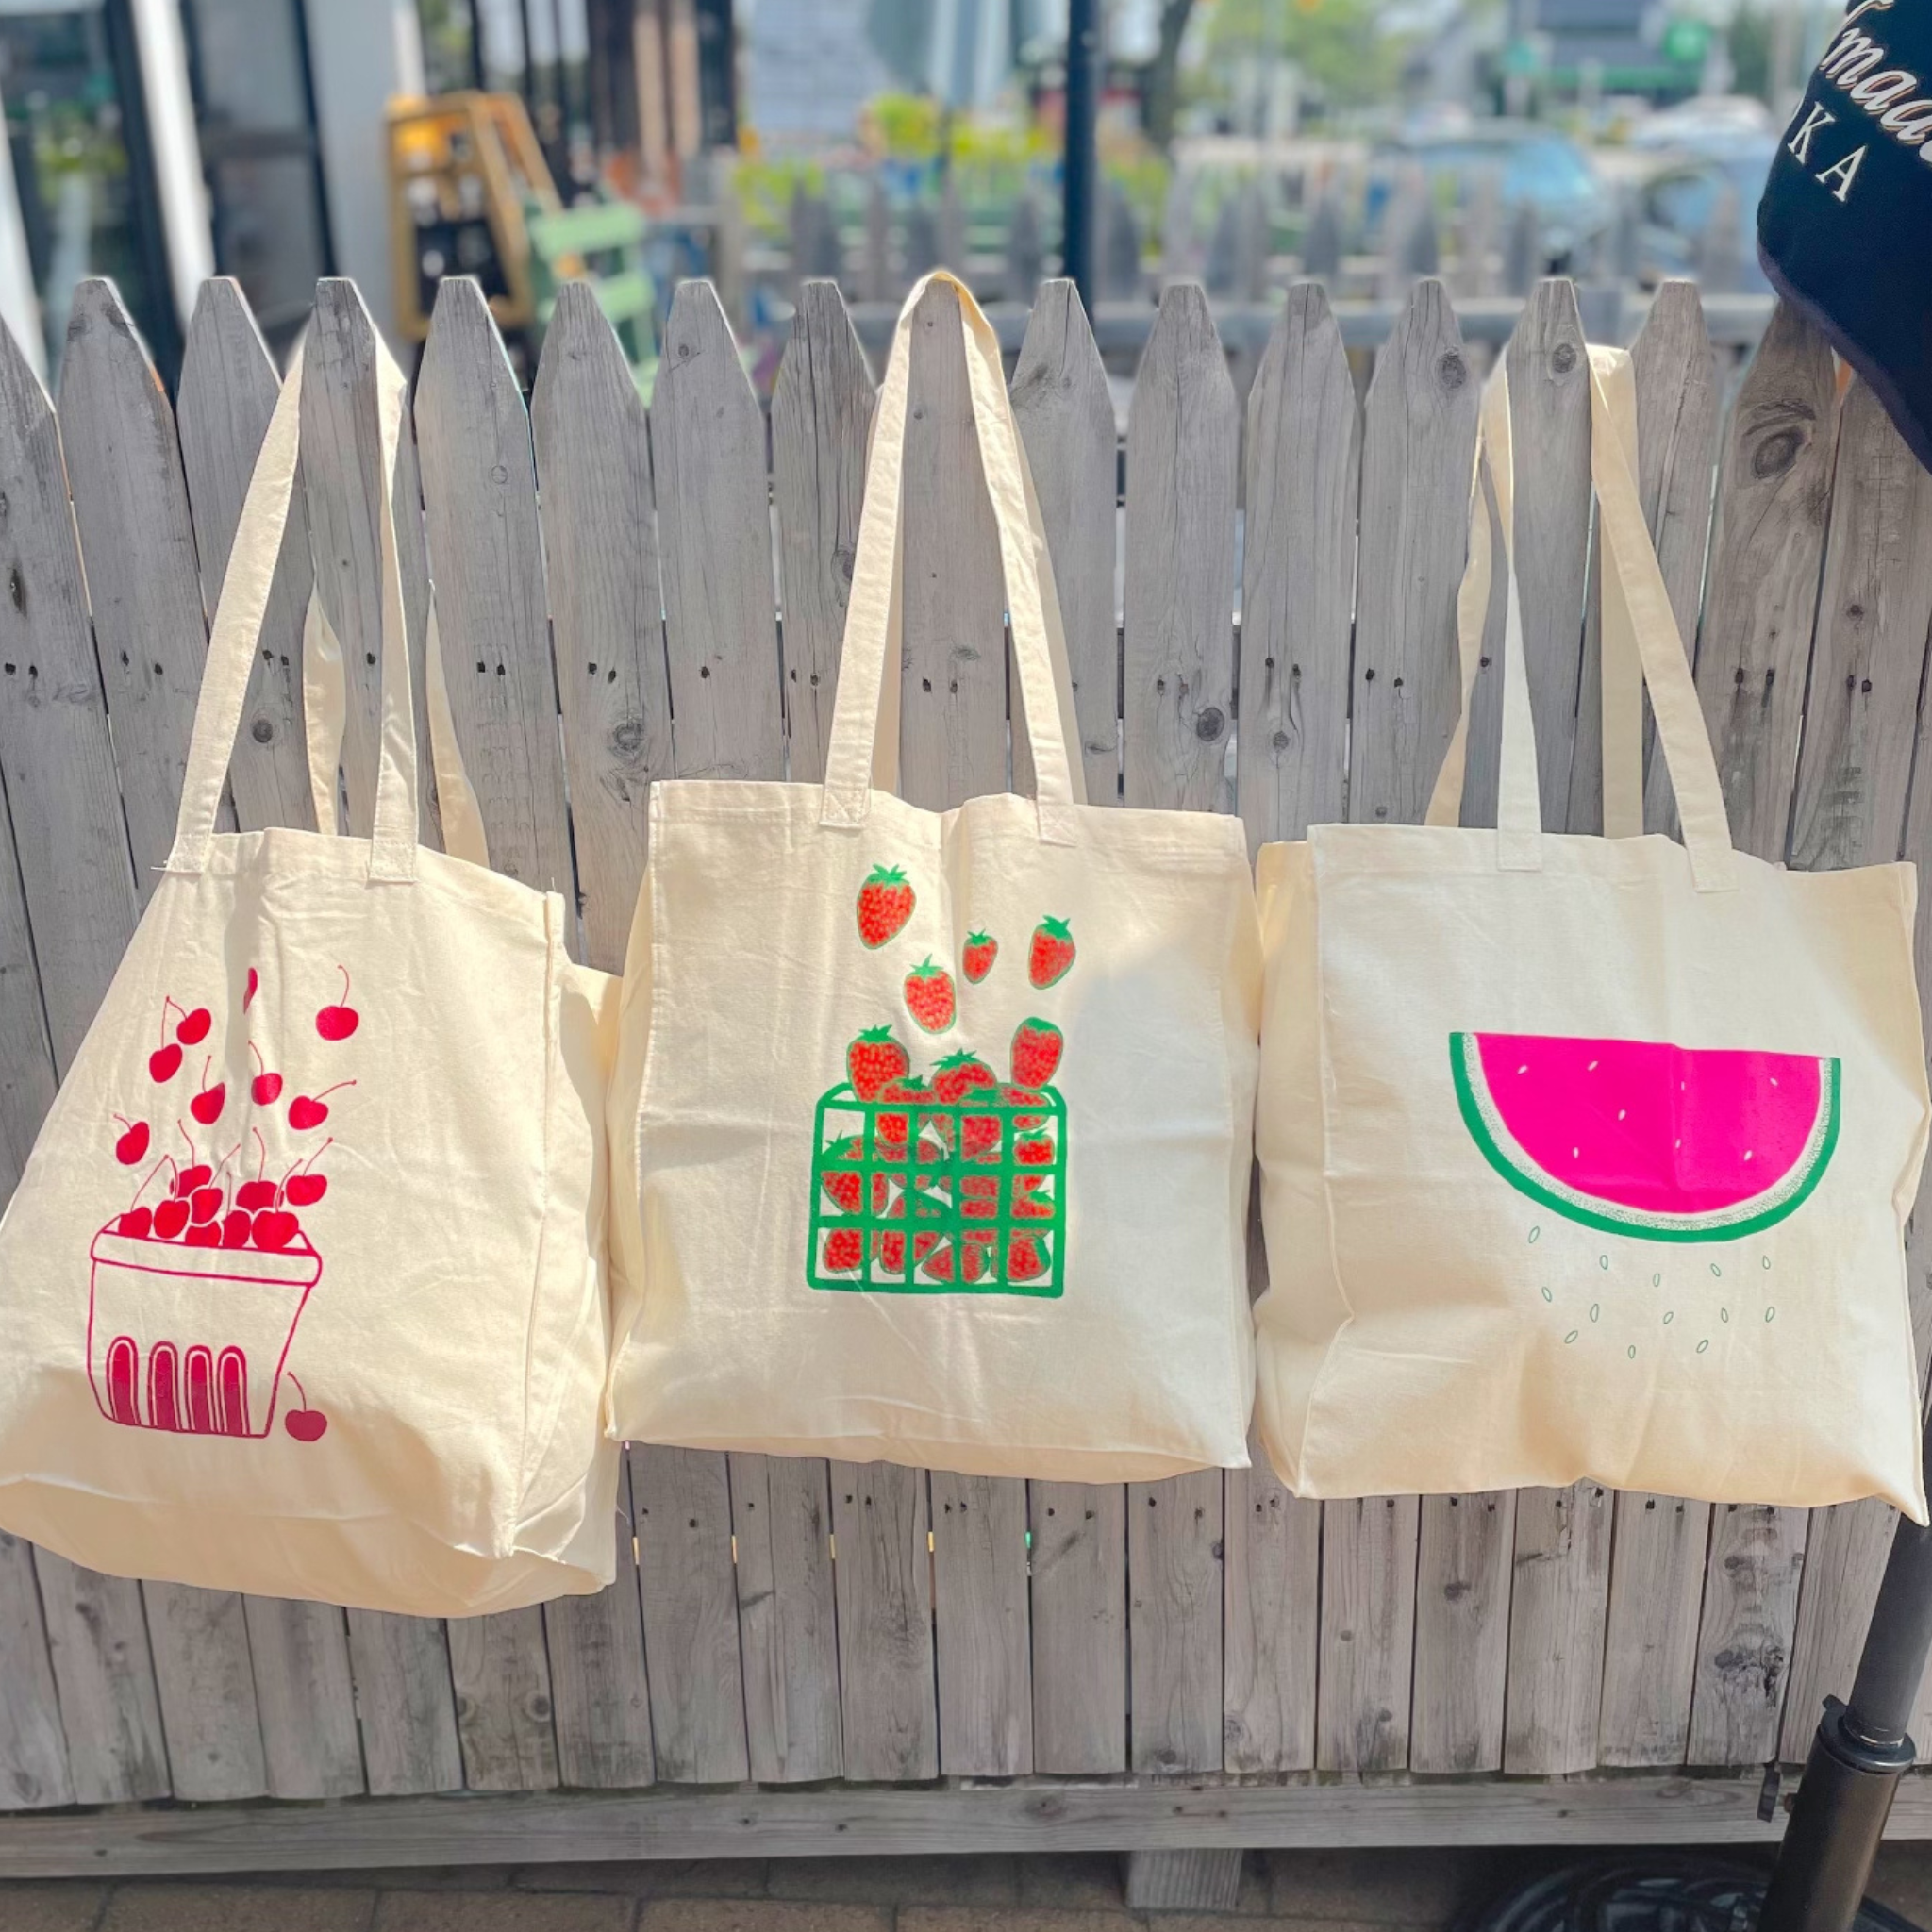 Fruit Canvas Tote